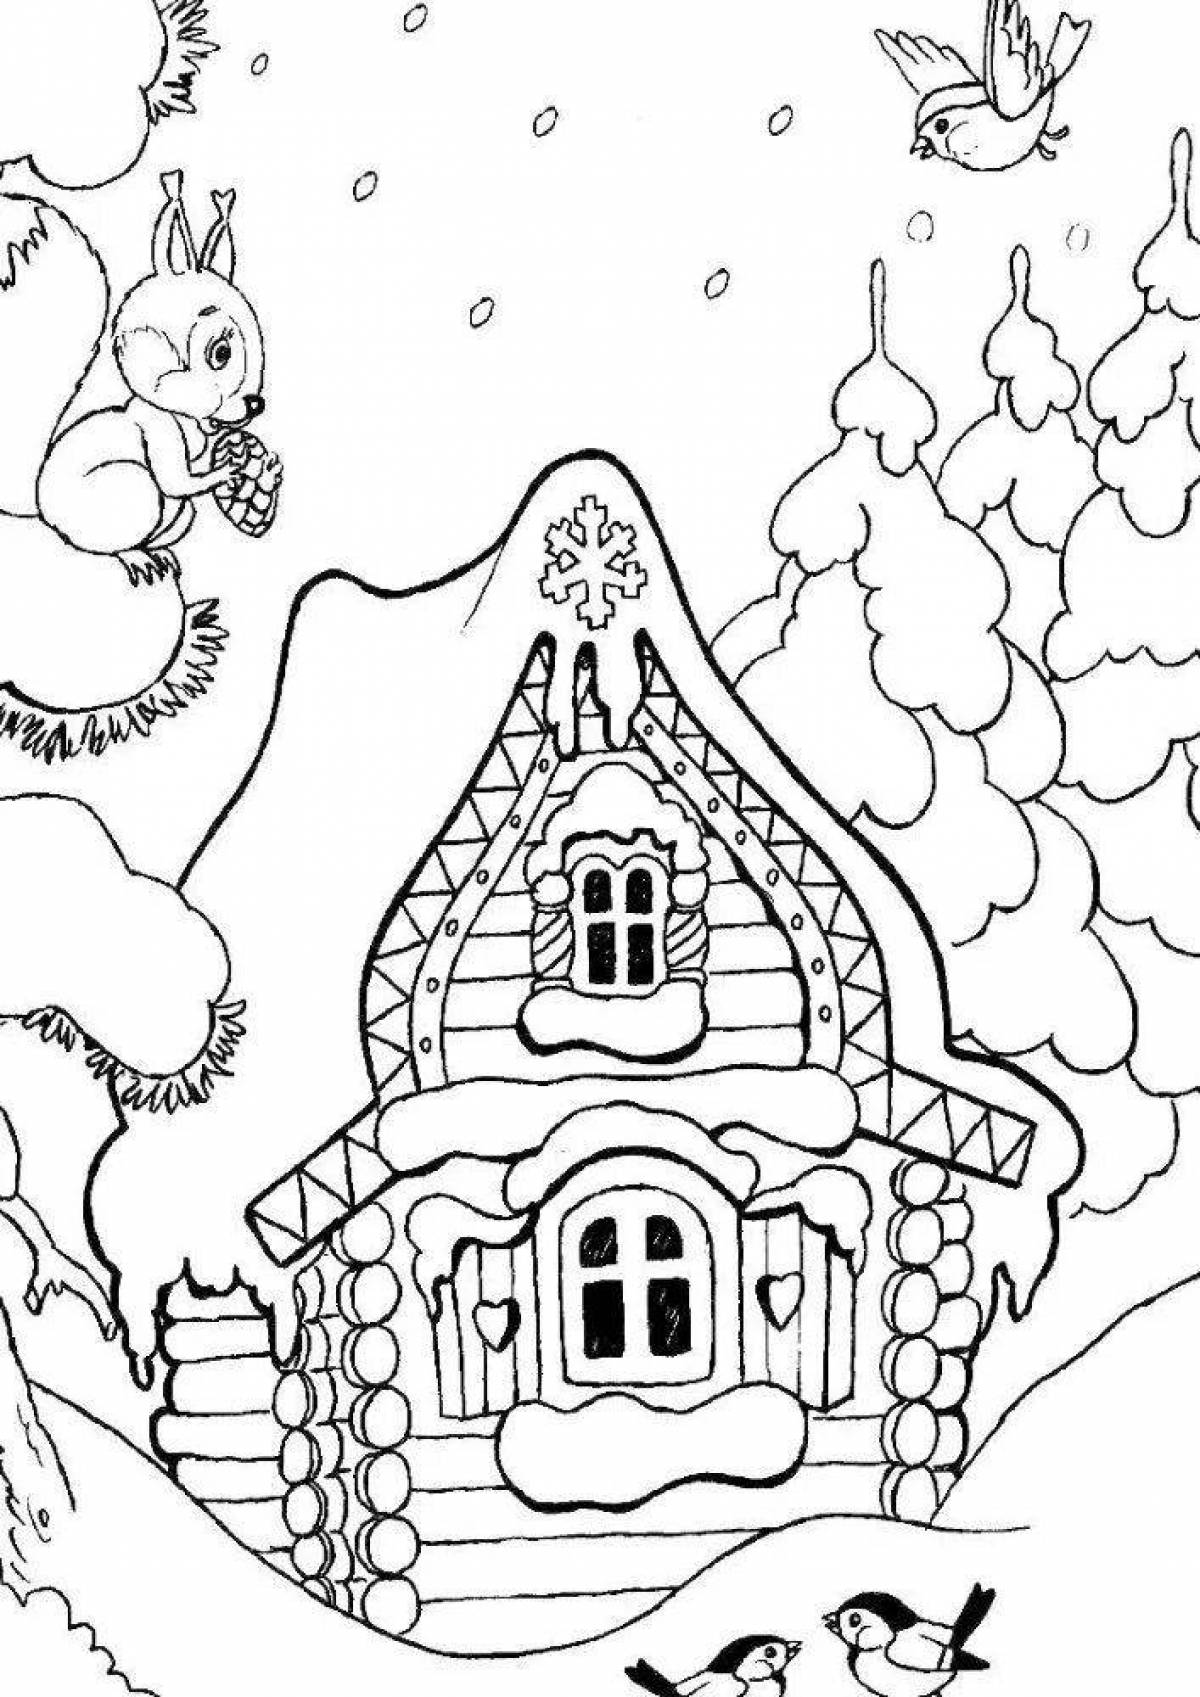 Peaceful forest house coloring